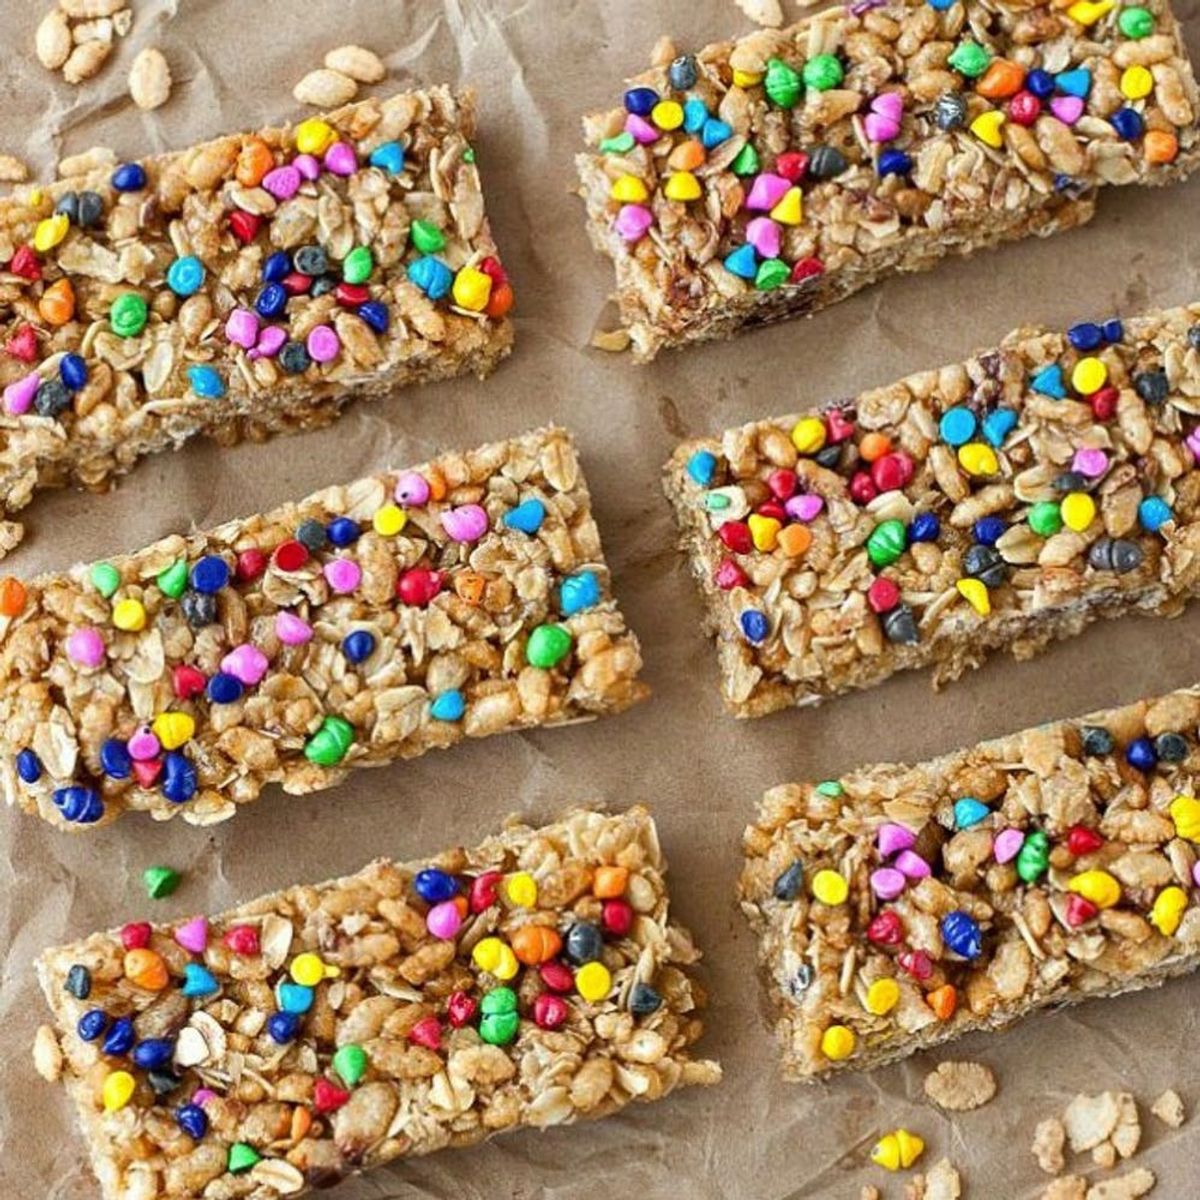 11 Easy Snack Swaps That Are Healthy and Yummy